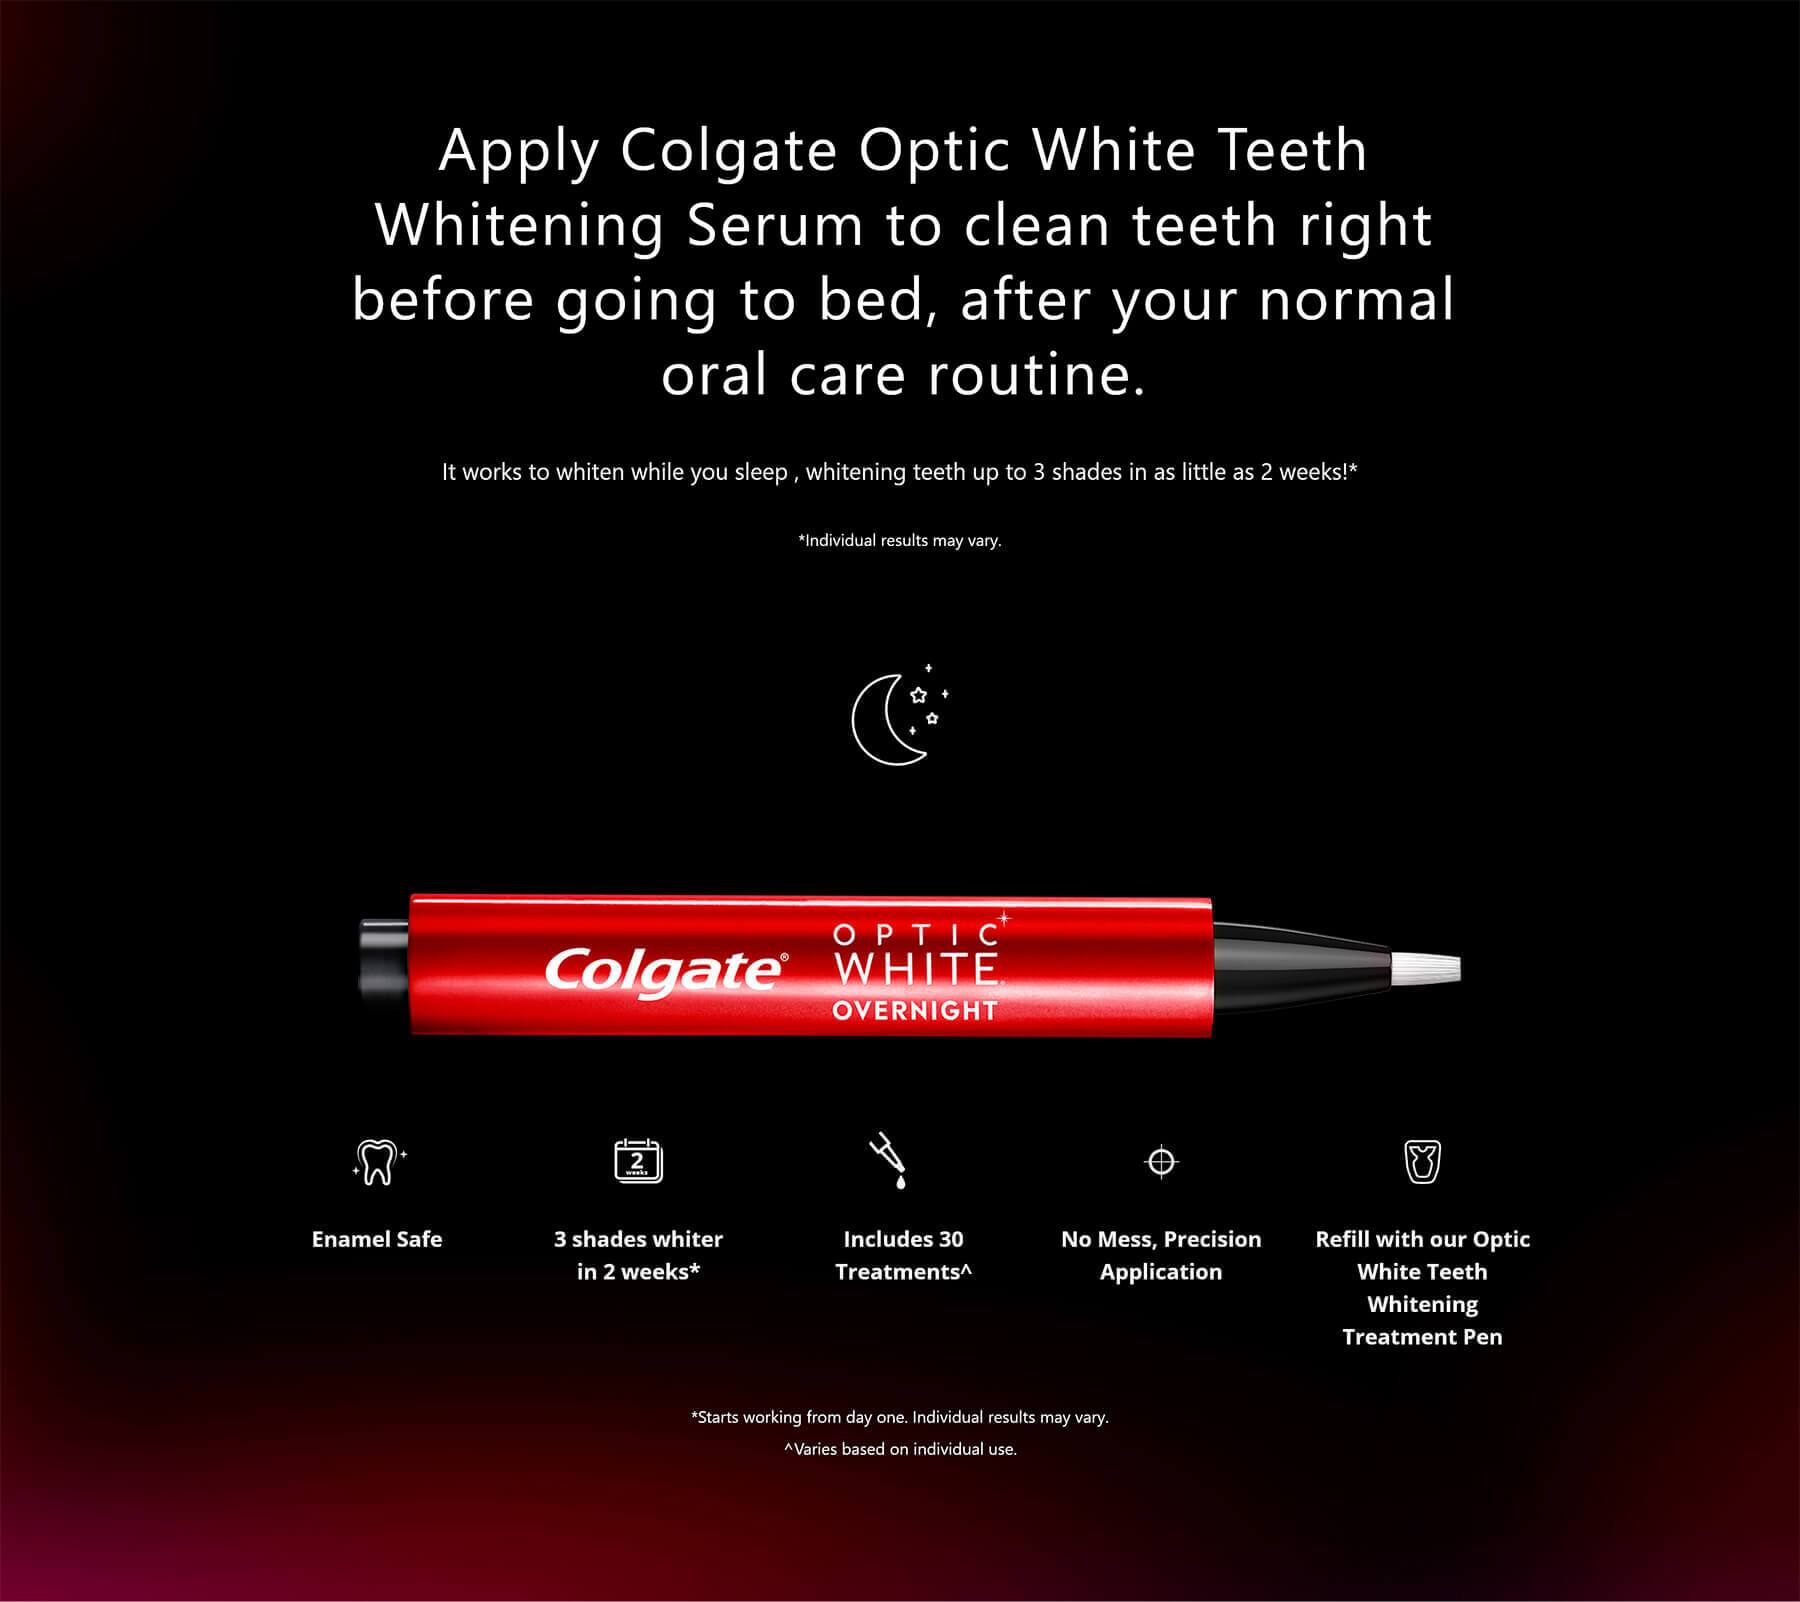 Apply Colgate Optic White Teeth Whitening Serum to clean teeth right before going to bed